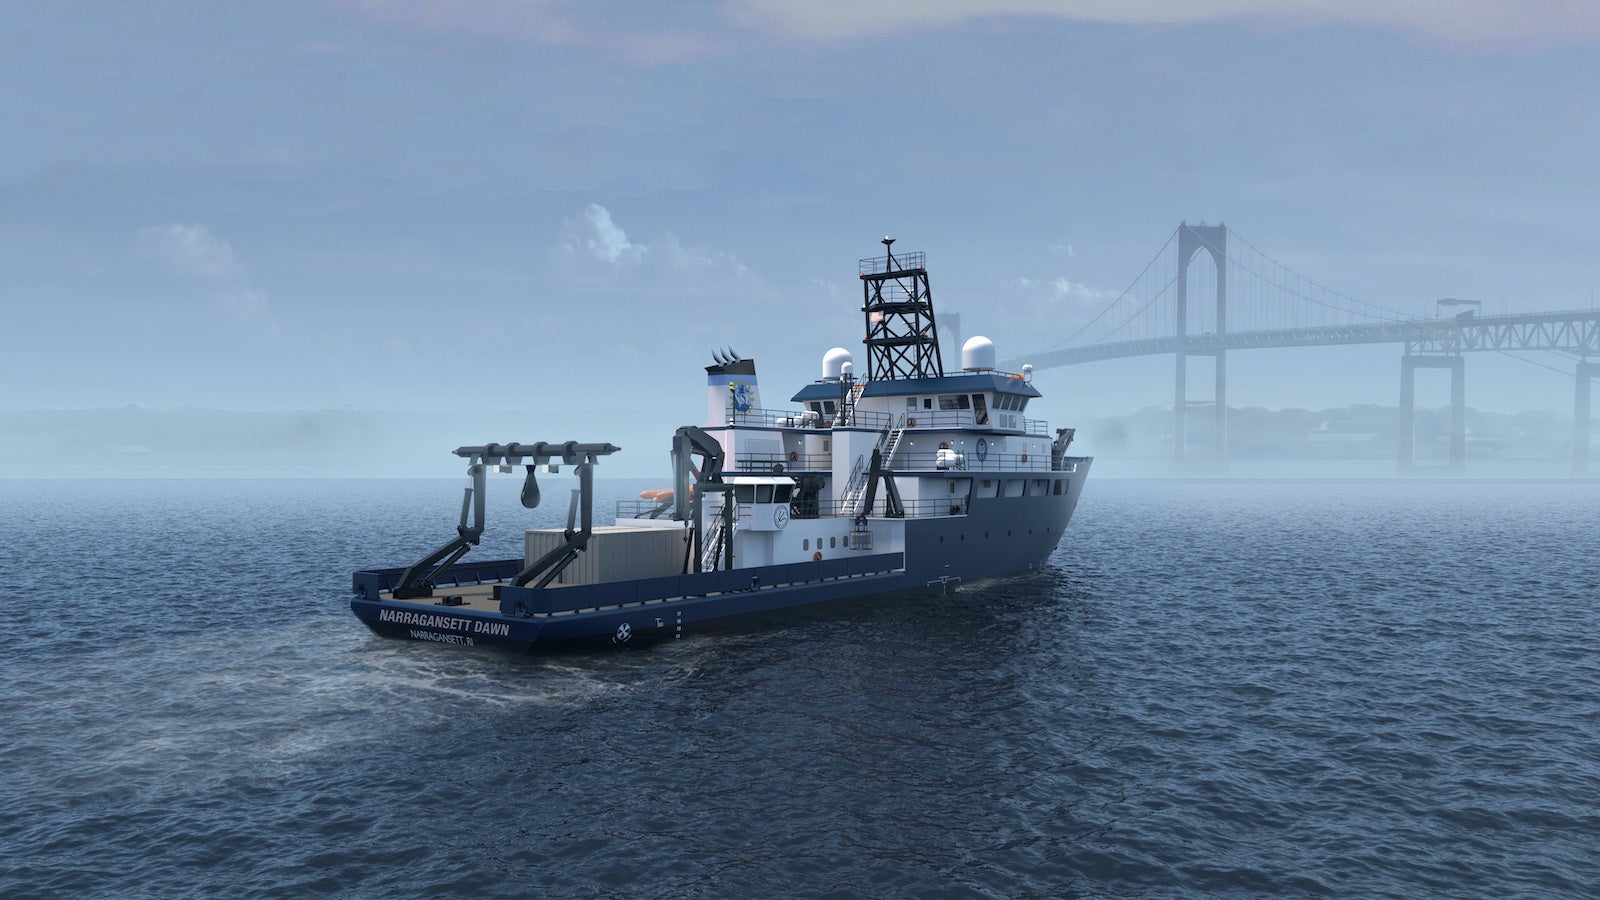 A realistic drawing on a blue and white research ship in teh water heading towards a high bridge. THe Stern of teh ship has he name "Narragansett Dawn" printed on it.